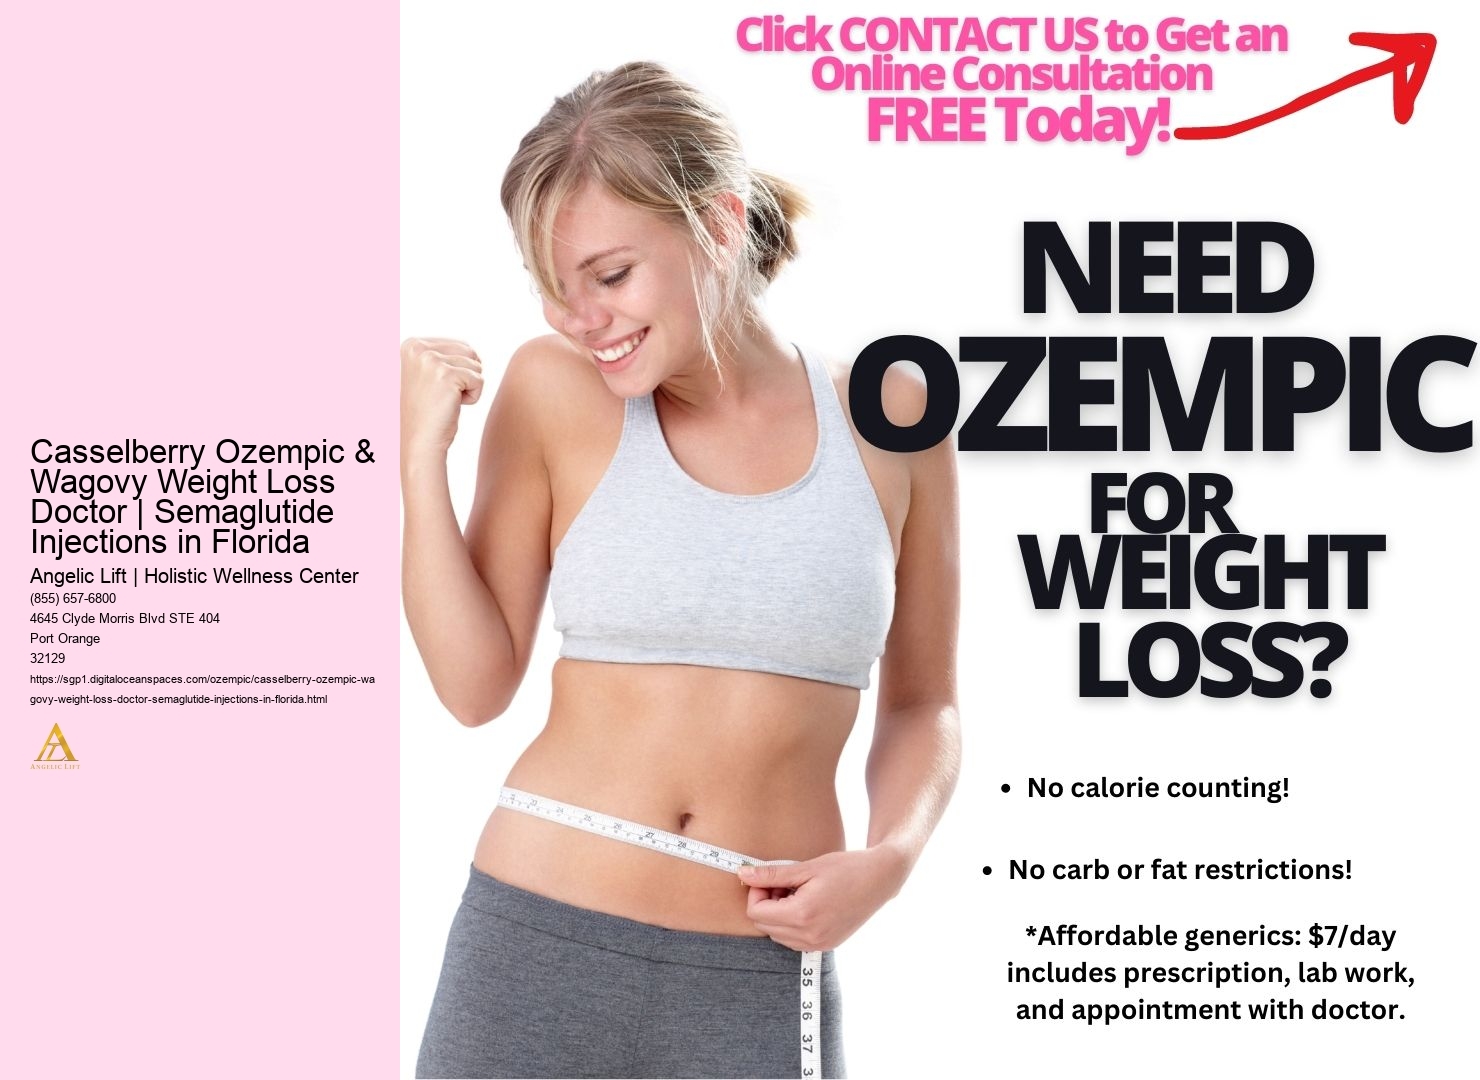 Casselberry Ozempic & Wagovy Weight Loss Doctor | Semaglutide Injections in Florida